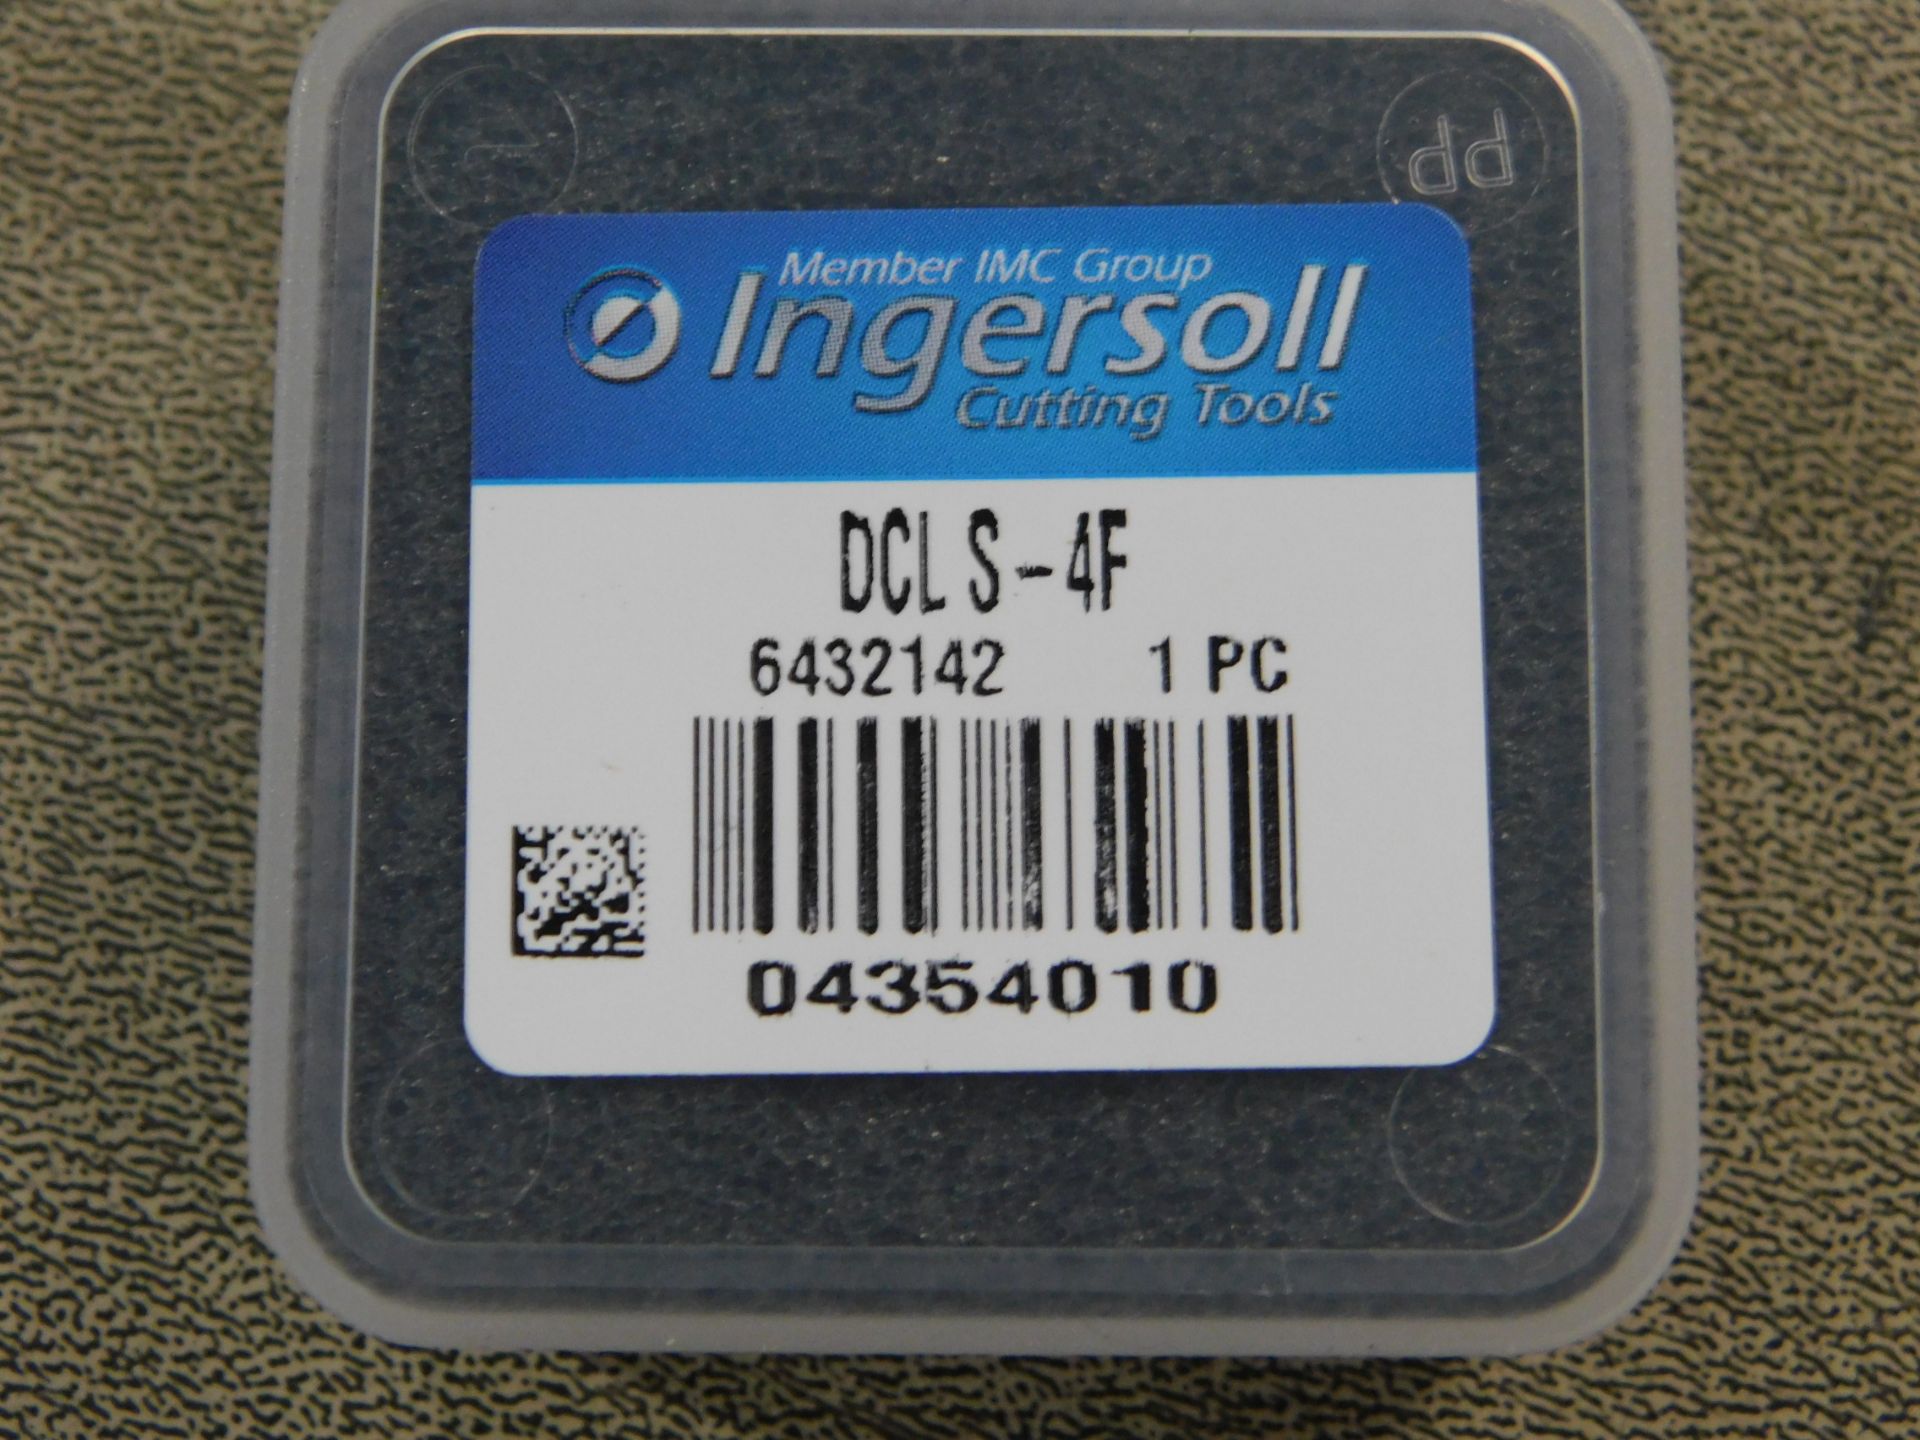 (10) Ingersoll Gold Rush #4354010/DCLS-4F Clamps with Inserts - Image 4 of 4